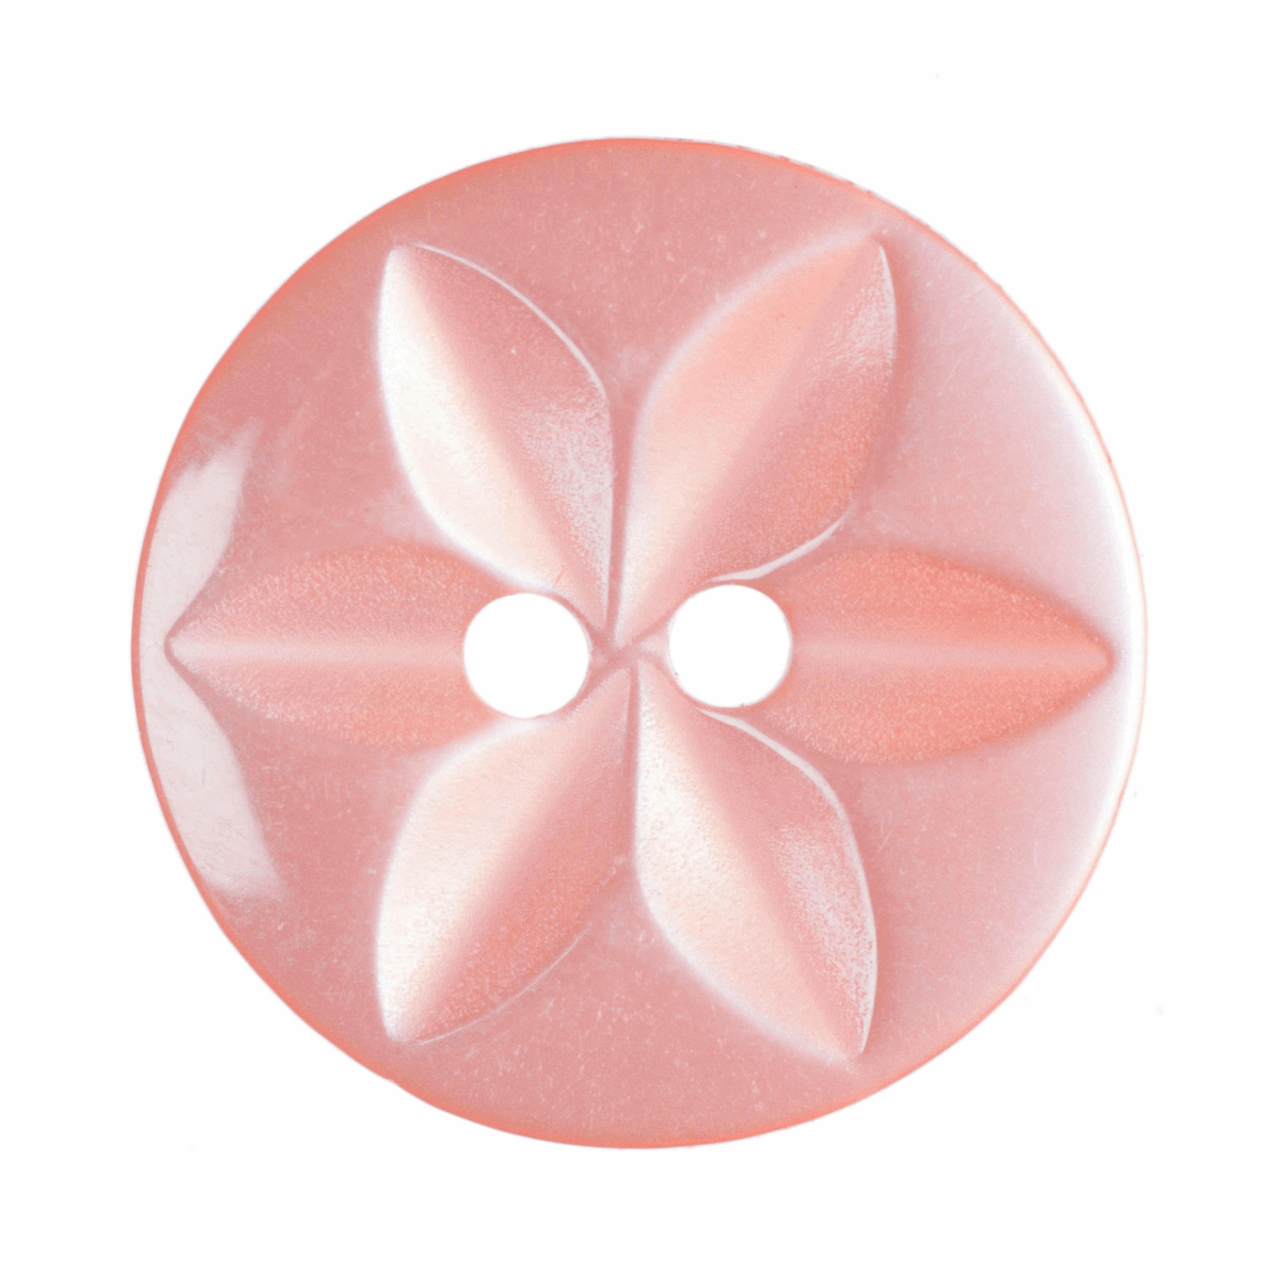 Salmon Pink Star Button, 14mm (9/16in) Diameter (Sold Individually)